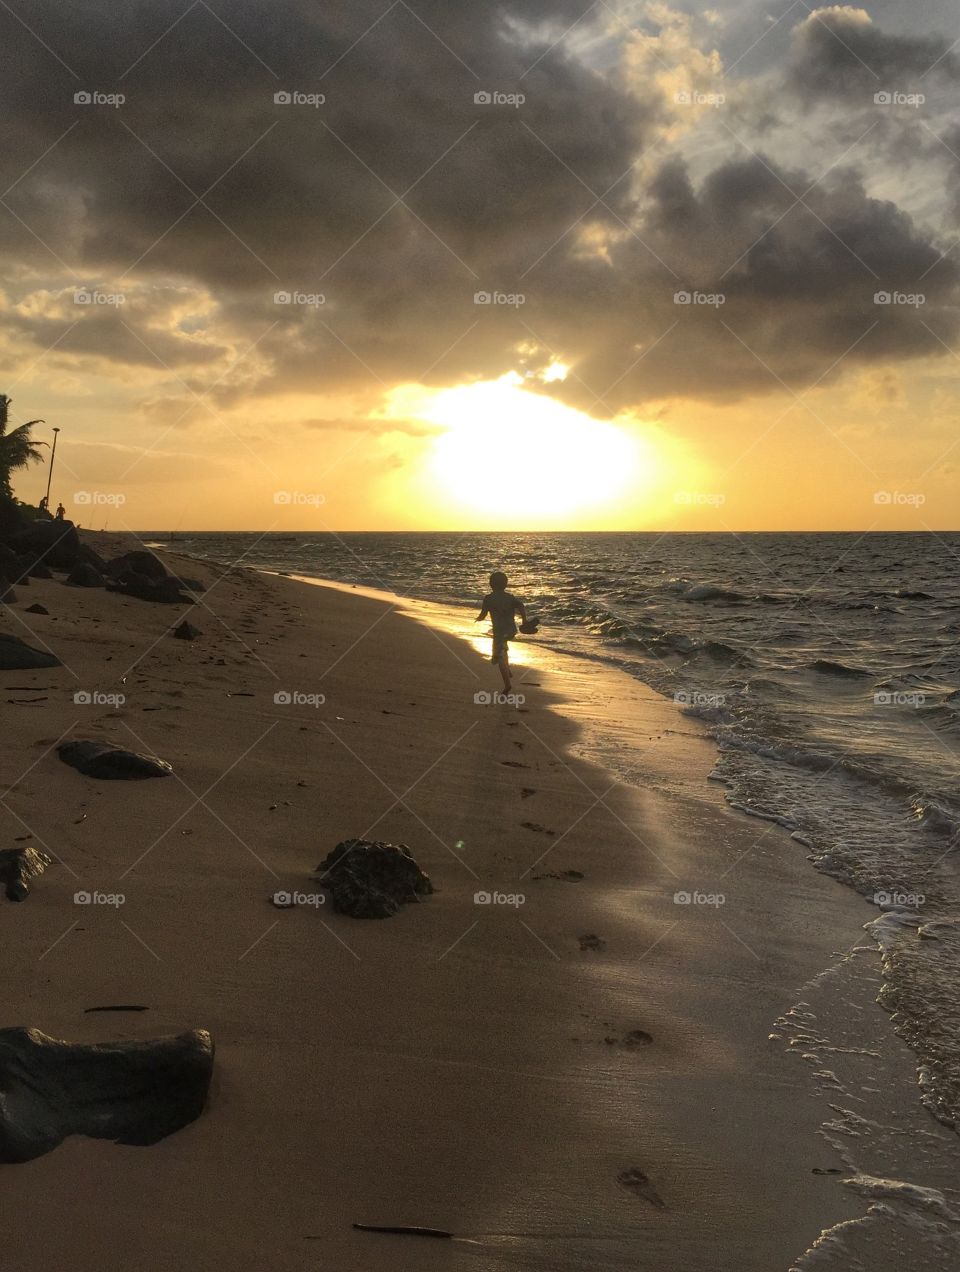 One of my boys running along the beach at sunset in Hawaii